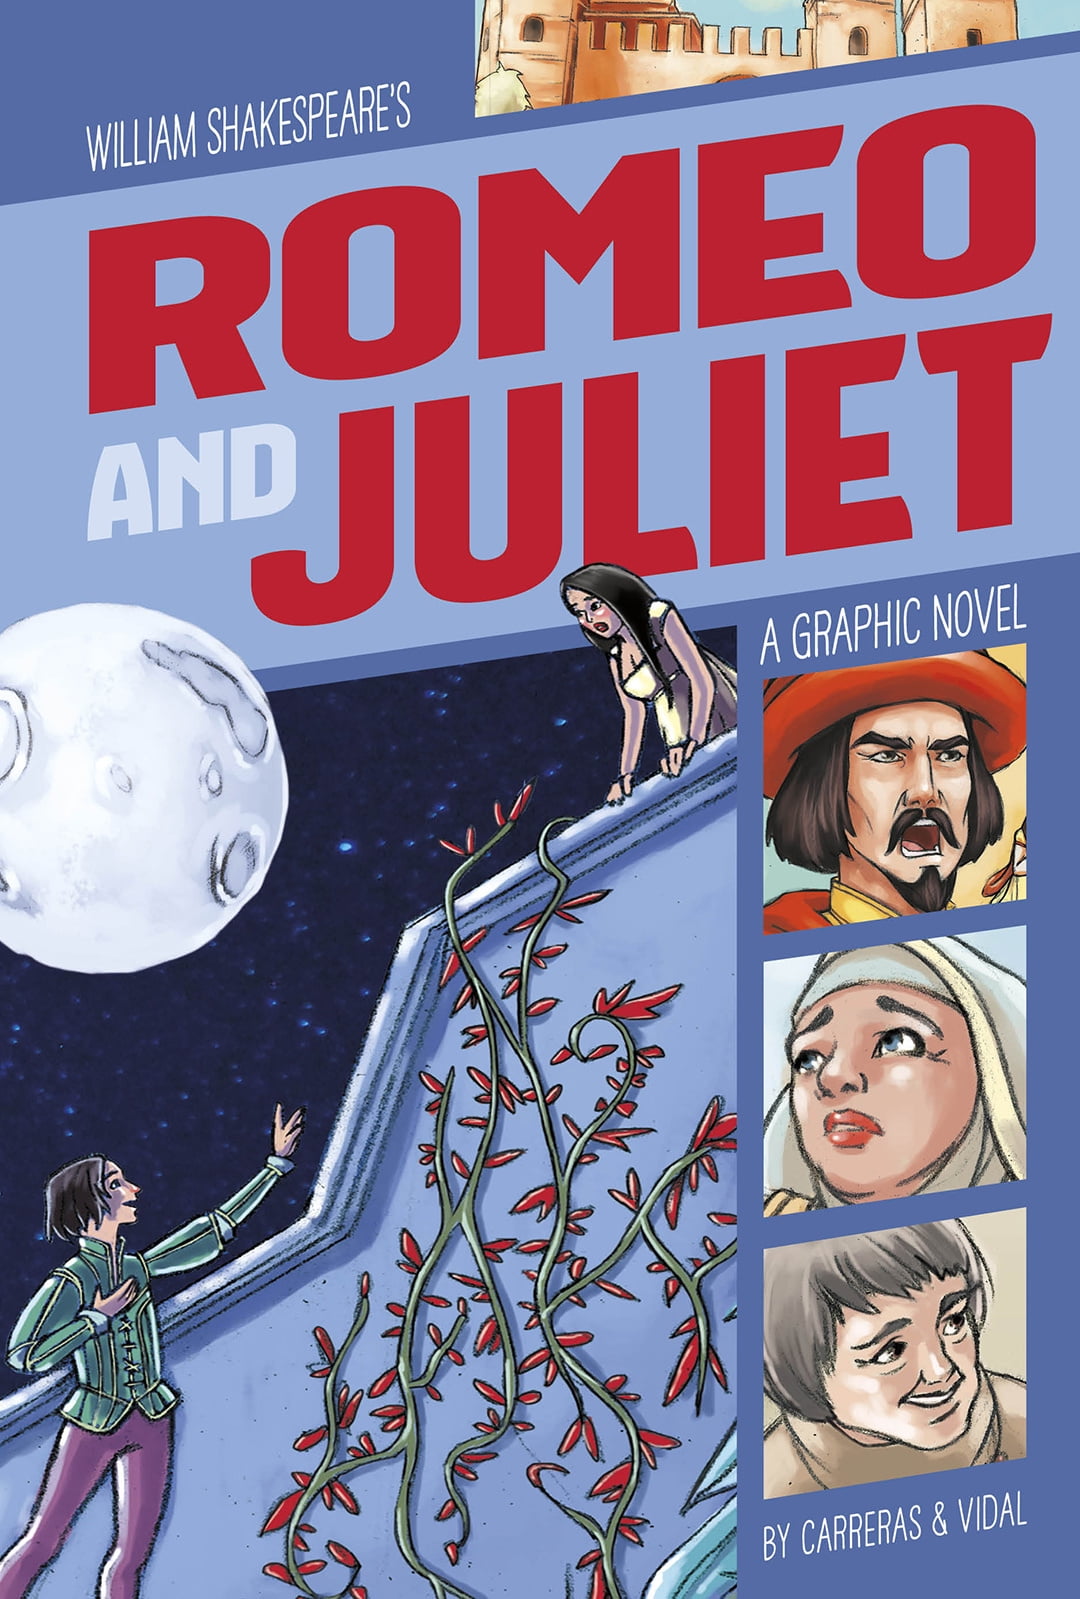 book review about romeo and juliet